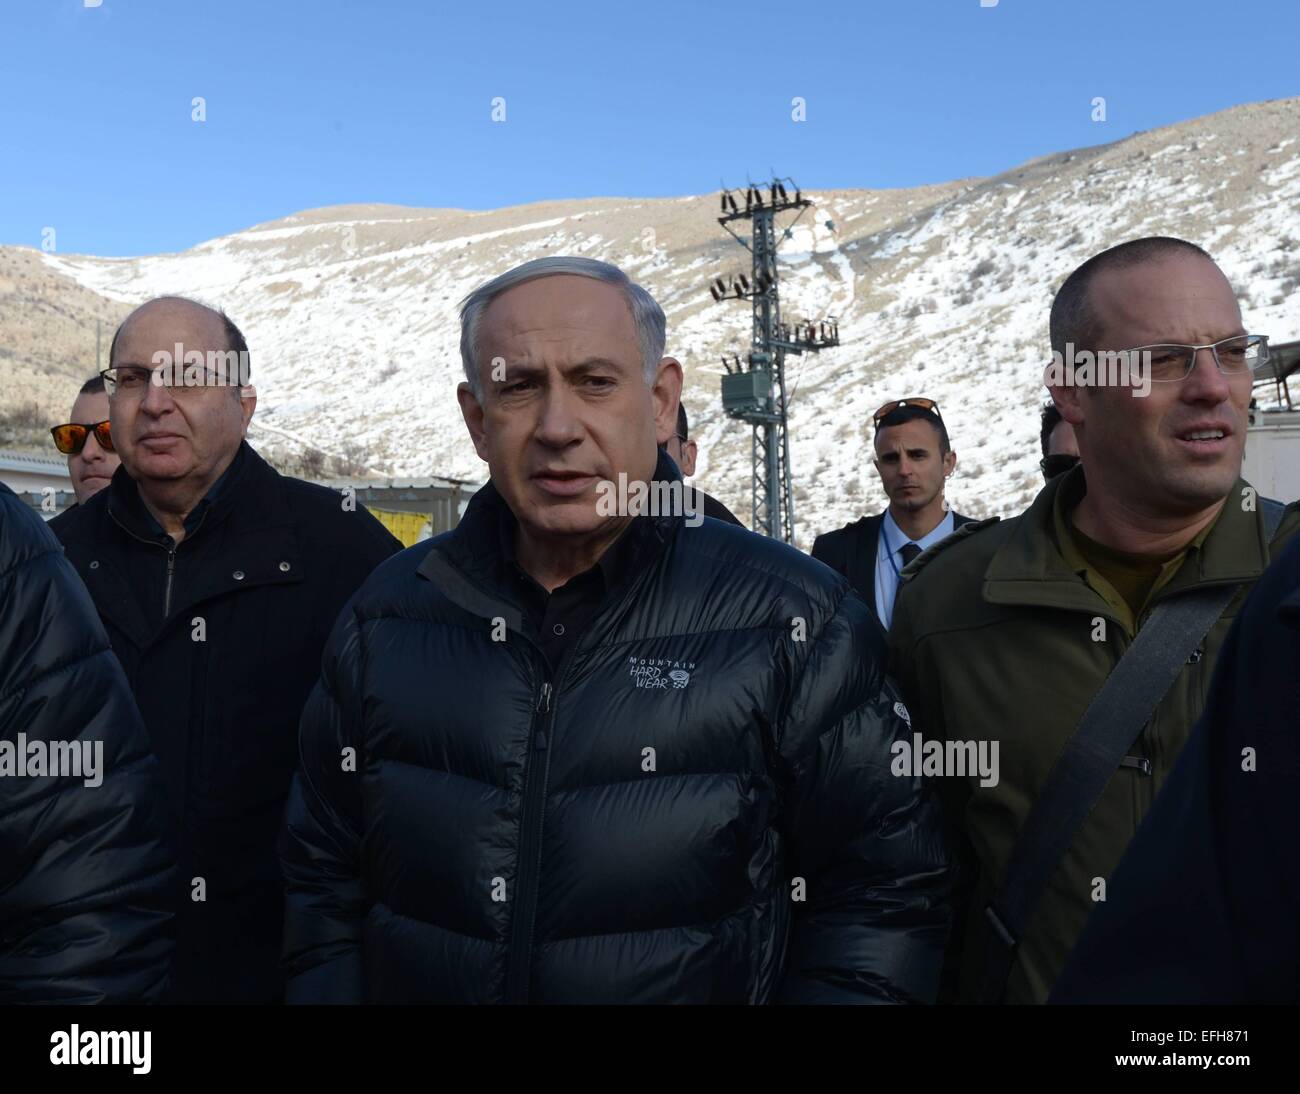 Jerusalem. 4th Feb, 2015. Israeli Prime Minister Benjamin Netanyahu (C) and Defense Minister Moshe Ya'alon (2nd L) visit an Israel Defense Forces (IDF) base near Mount Hermon, on Feb. 4, 2015. Israeli Prime Minister Benjamin Netanyahu said Wednesday that Iran is trying to open a front against Israel along its border with Syria. Netanyahu visited earlier in the day an Israel Defense Forces (IDF) base near Mount Hermon along with Defense Minister Moshe Ya'alon. Credit:  GPO/Amos Ben Gershom/Xinhua/Alamy Live News Stock Photo